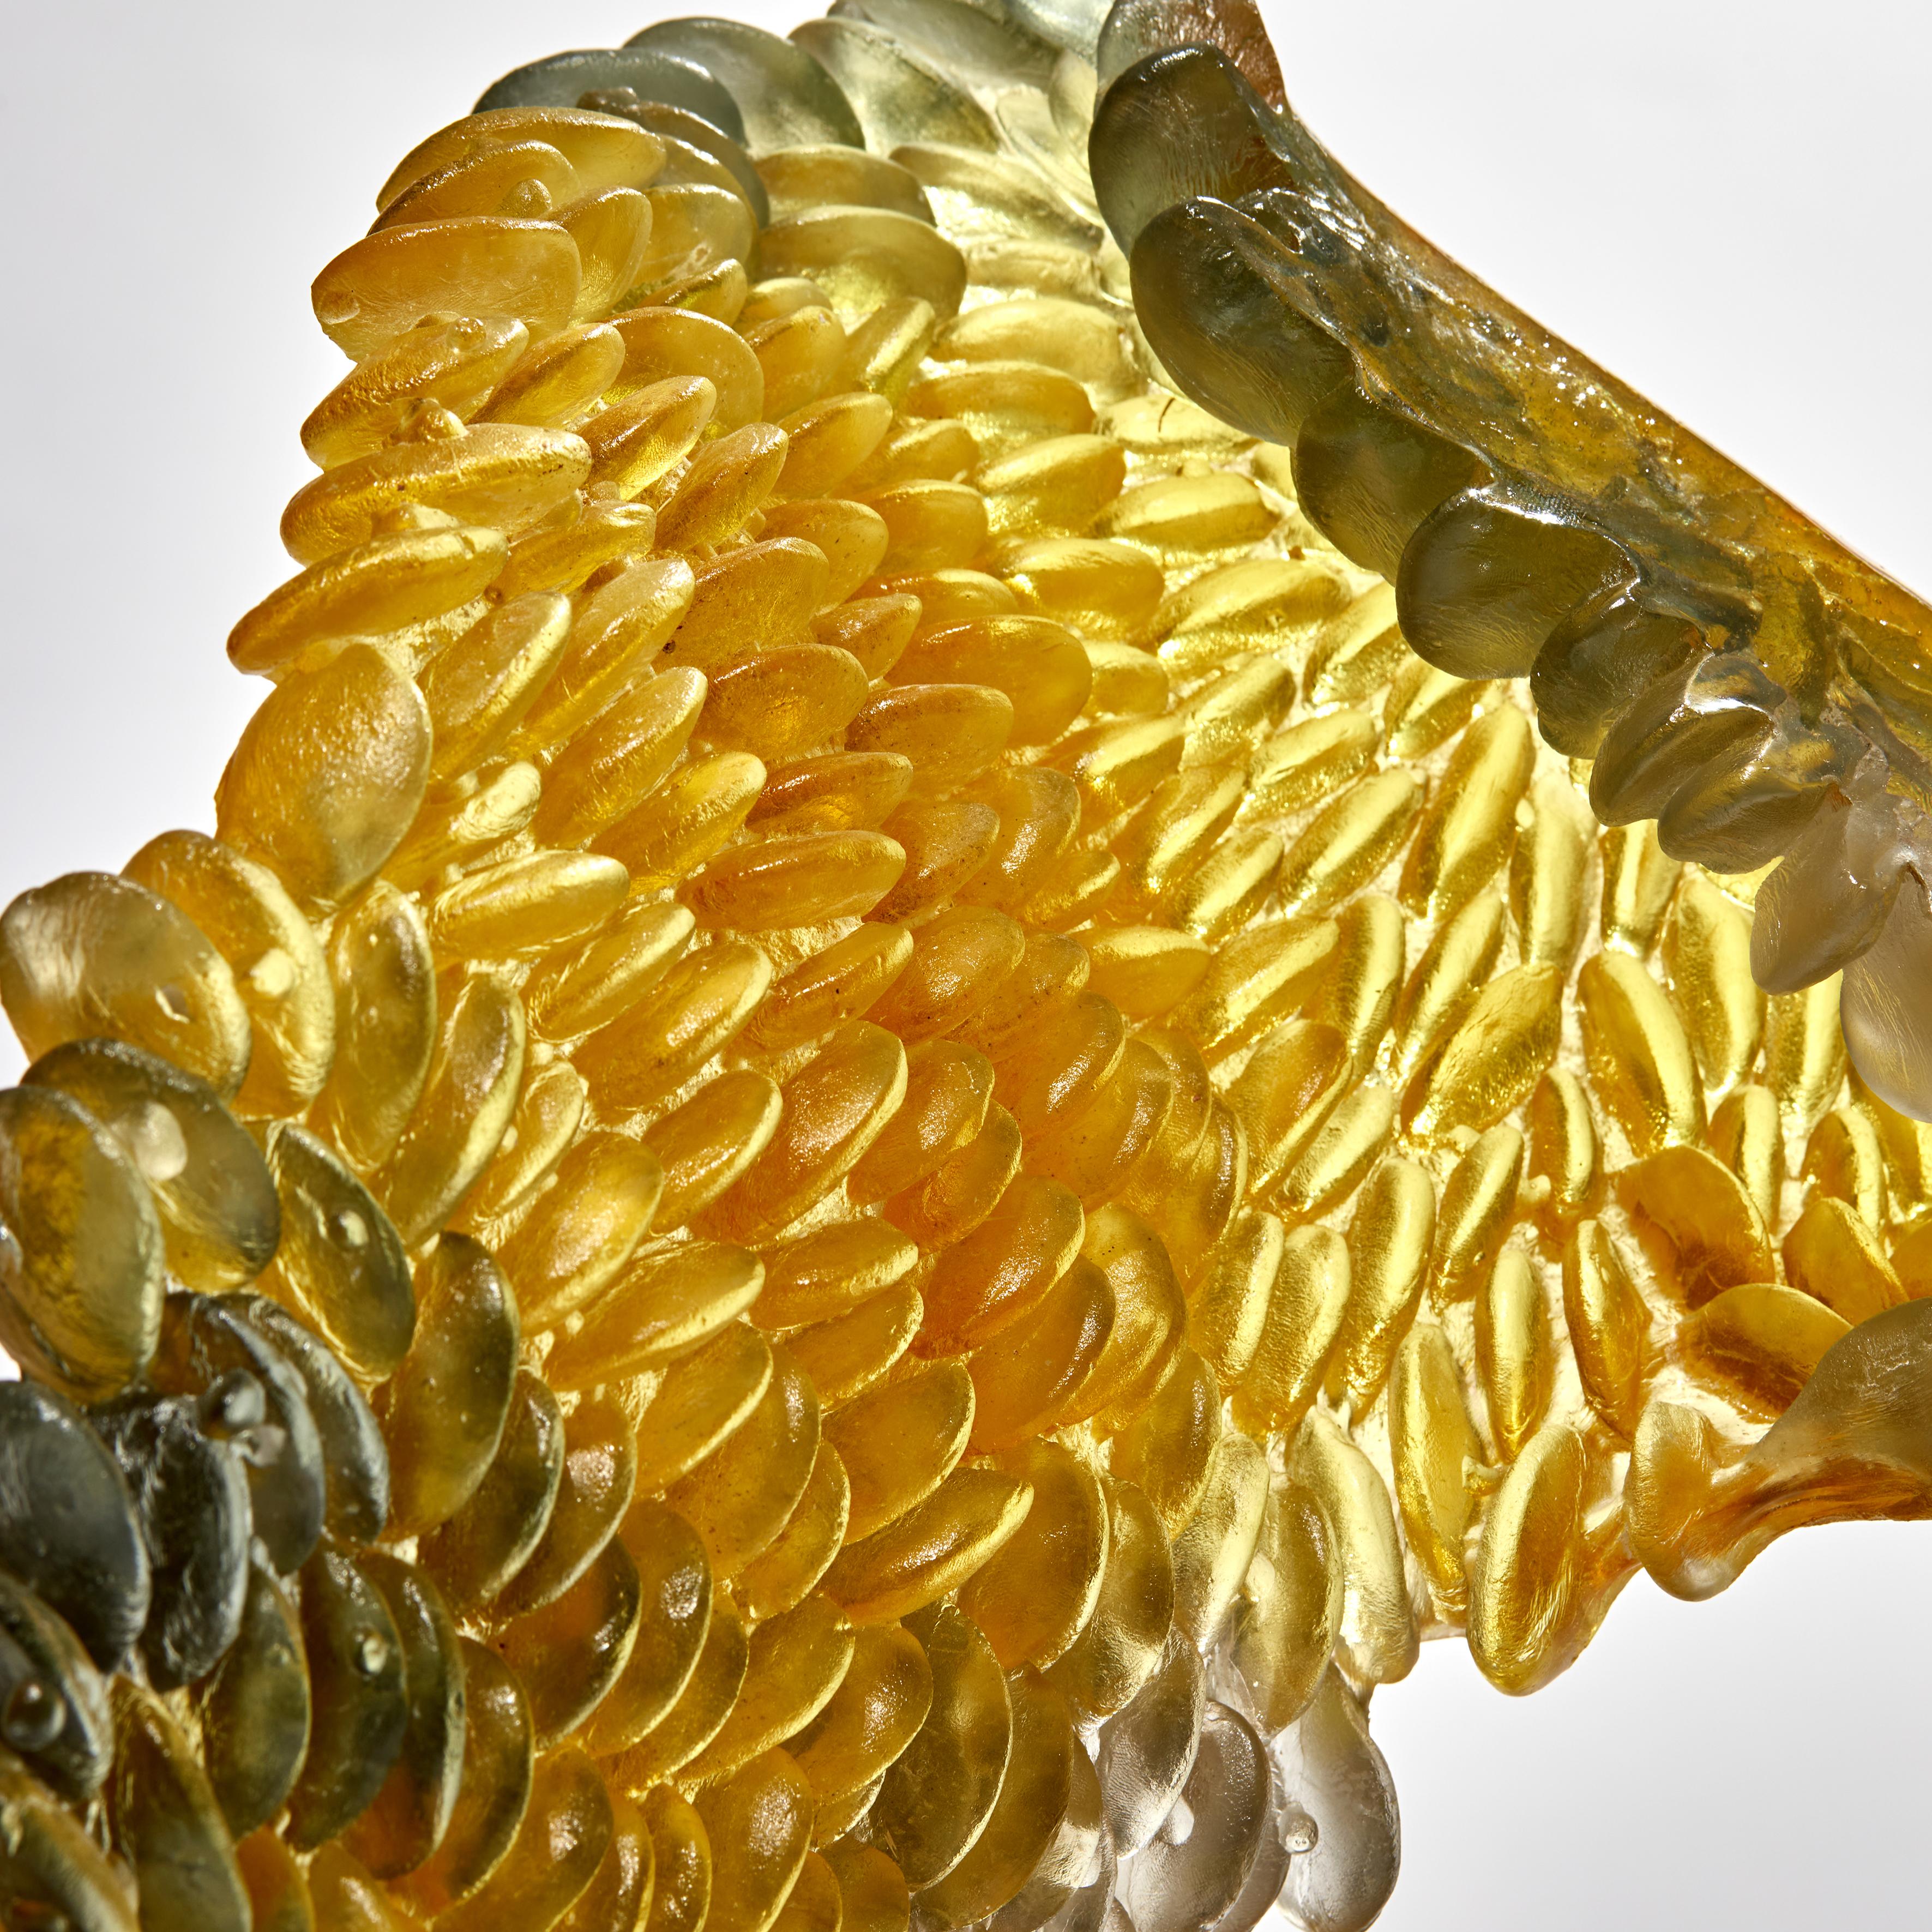 Cast Infinity, a Unique Glass Sculpture in Amber, Gold & Grey by Nina Casson McGarva